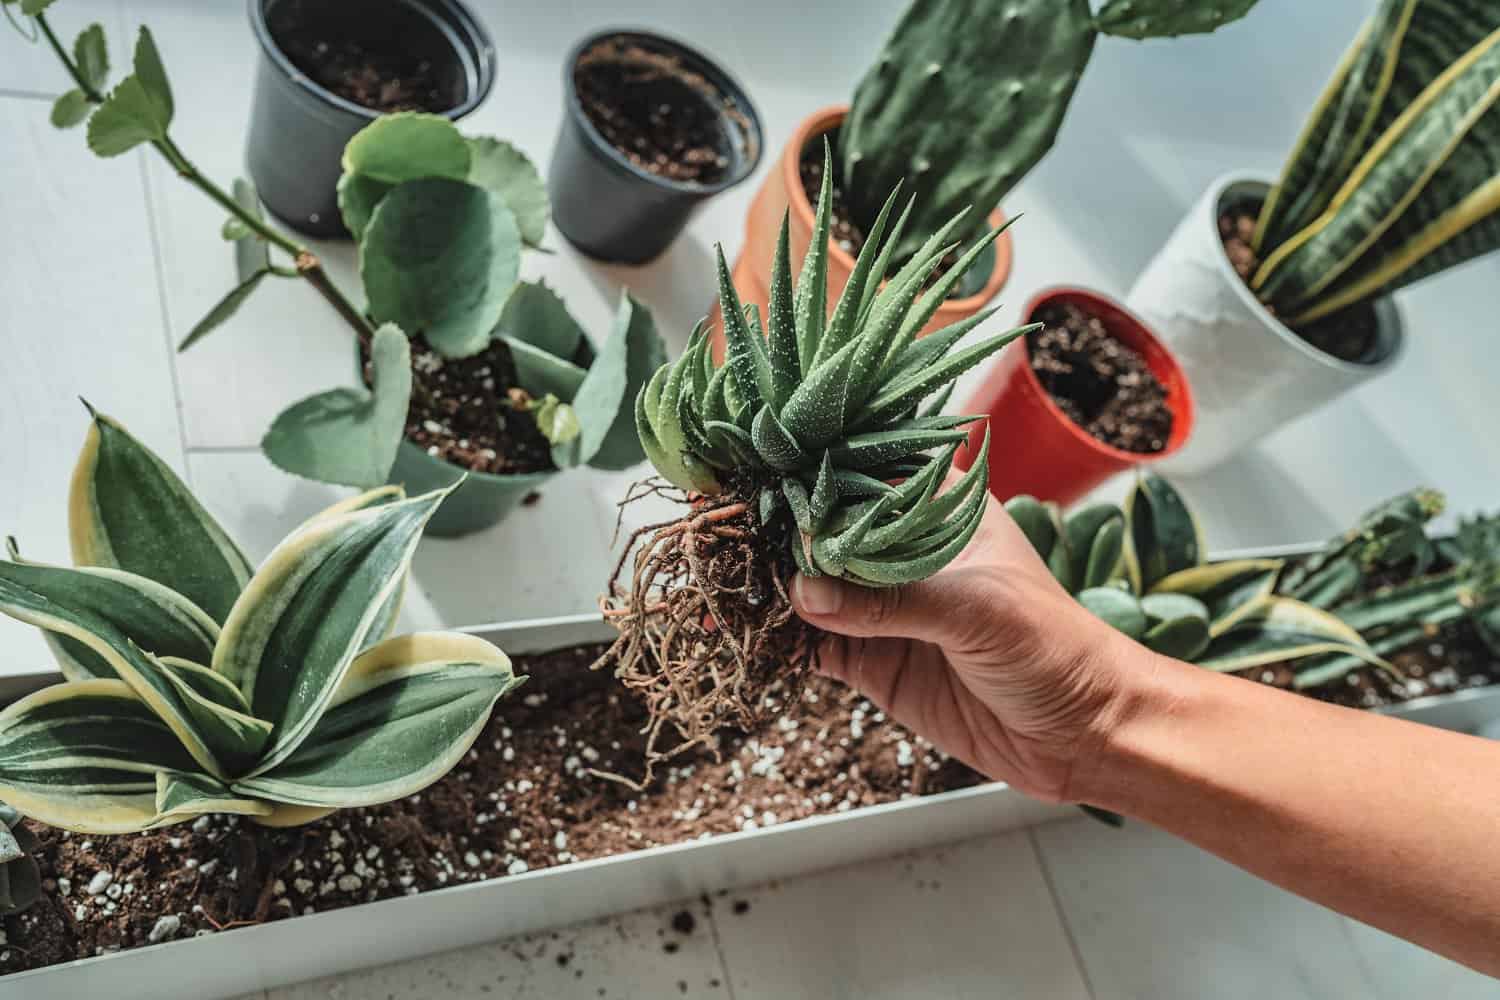 How to Repot Succulents (A Complete Step-by-Step Guide)